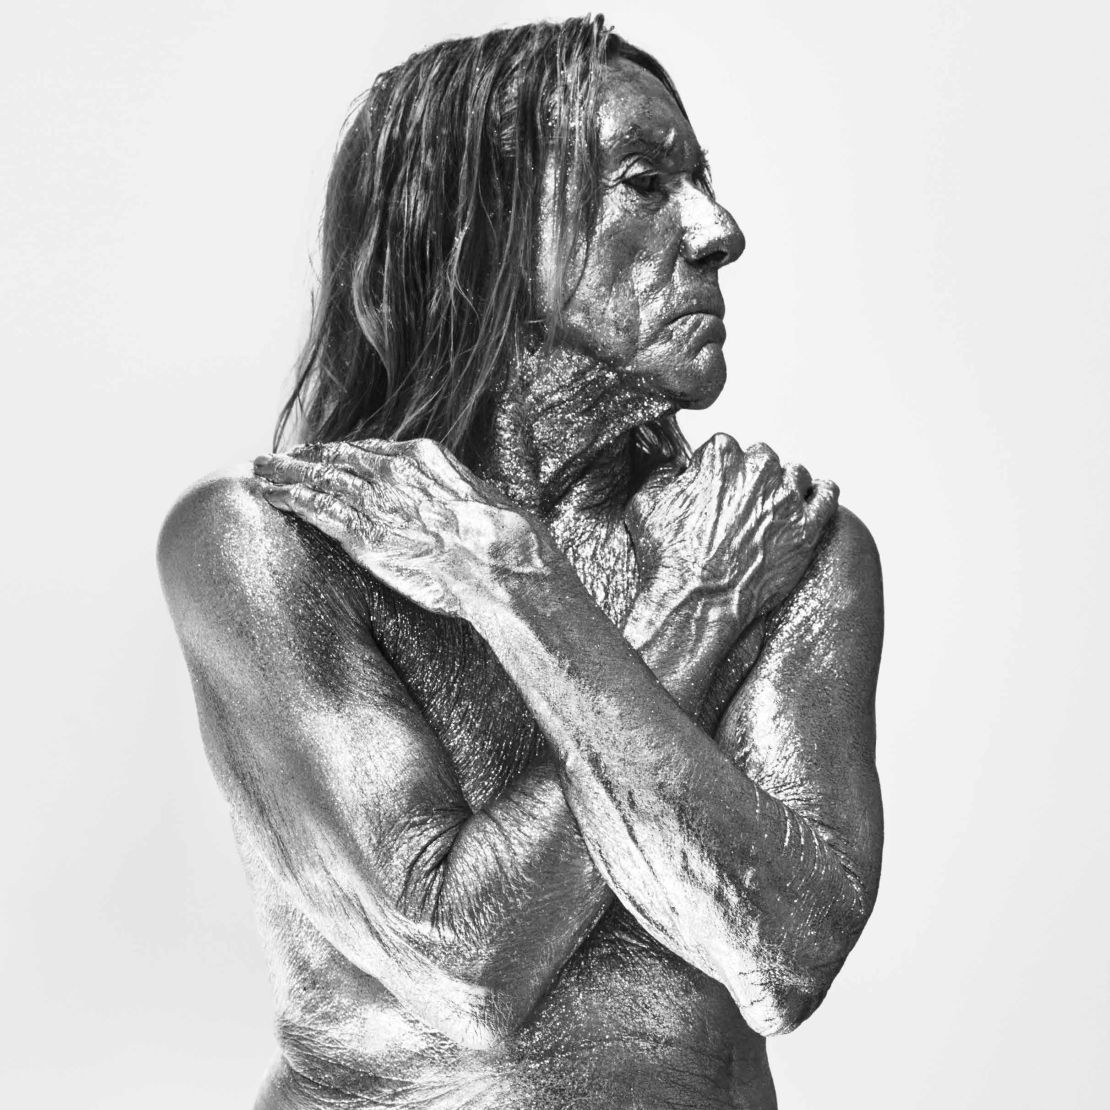 Iggy Pop was doused in silver paint for part of his photo shoot.